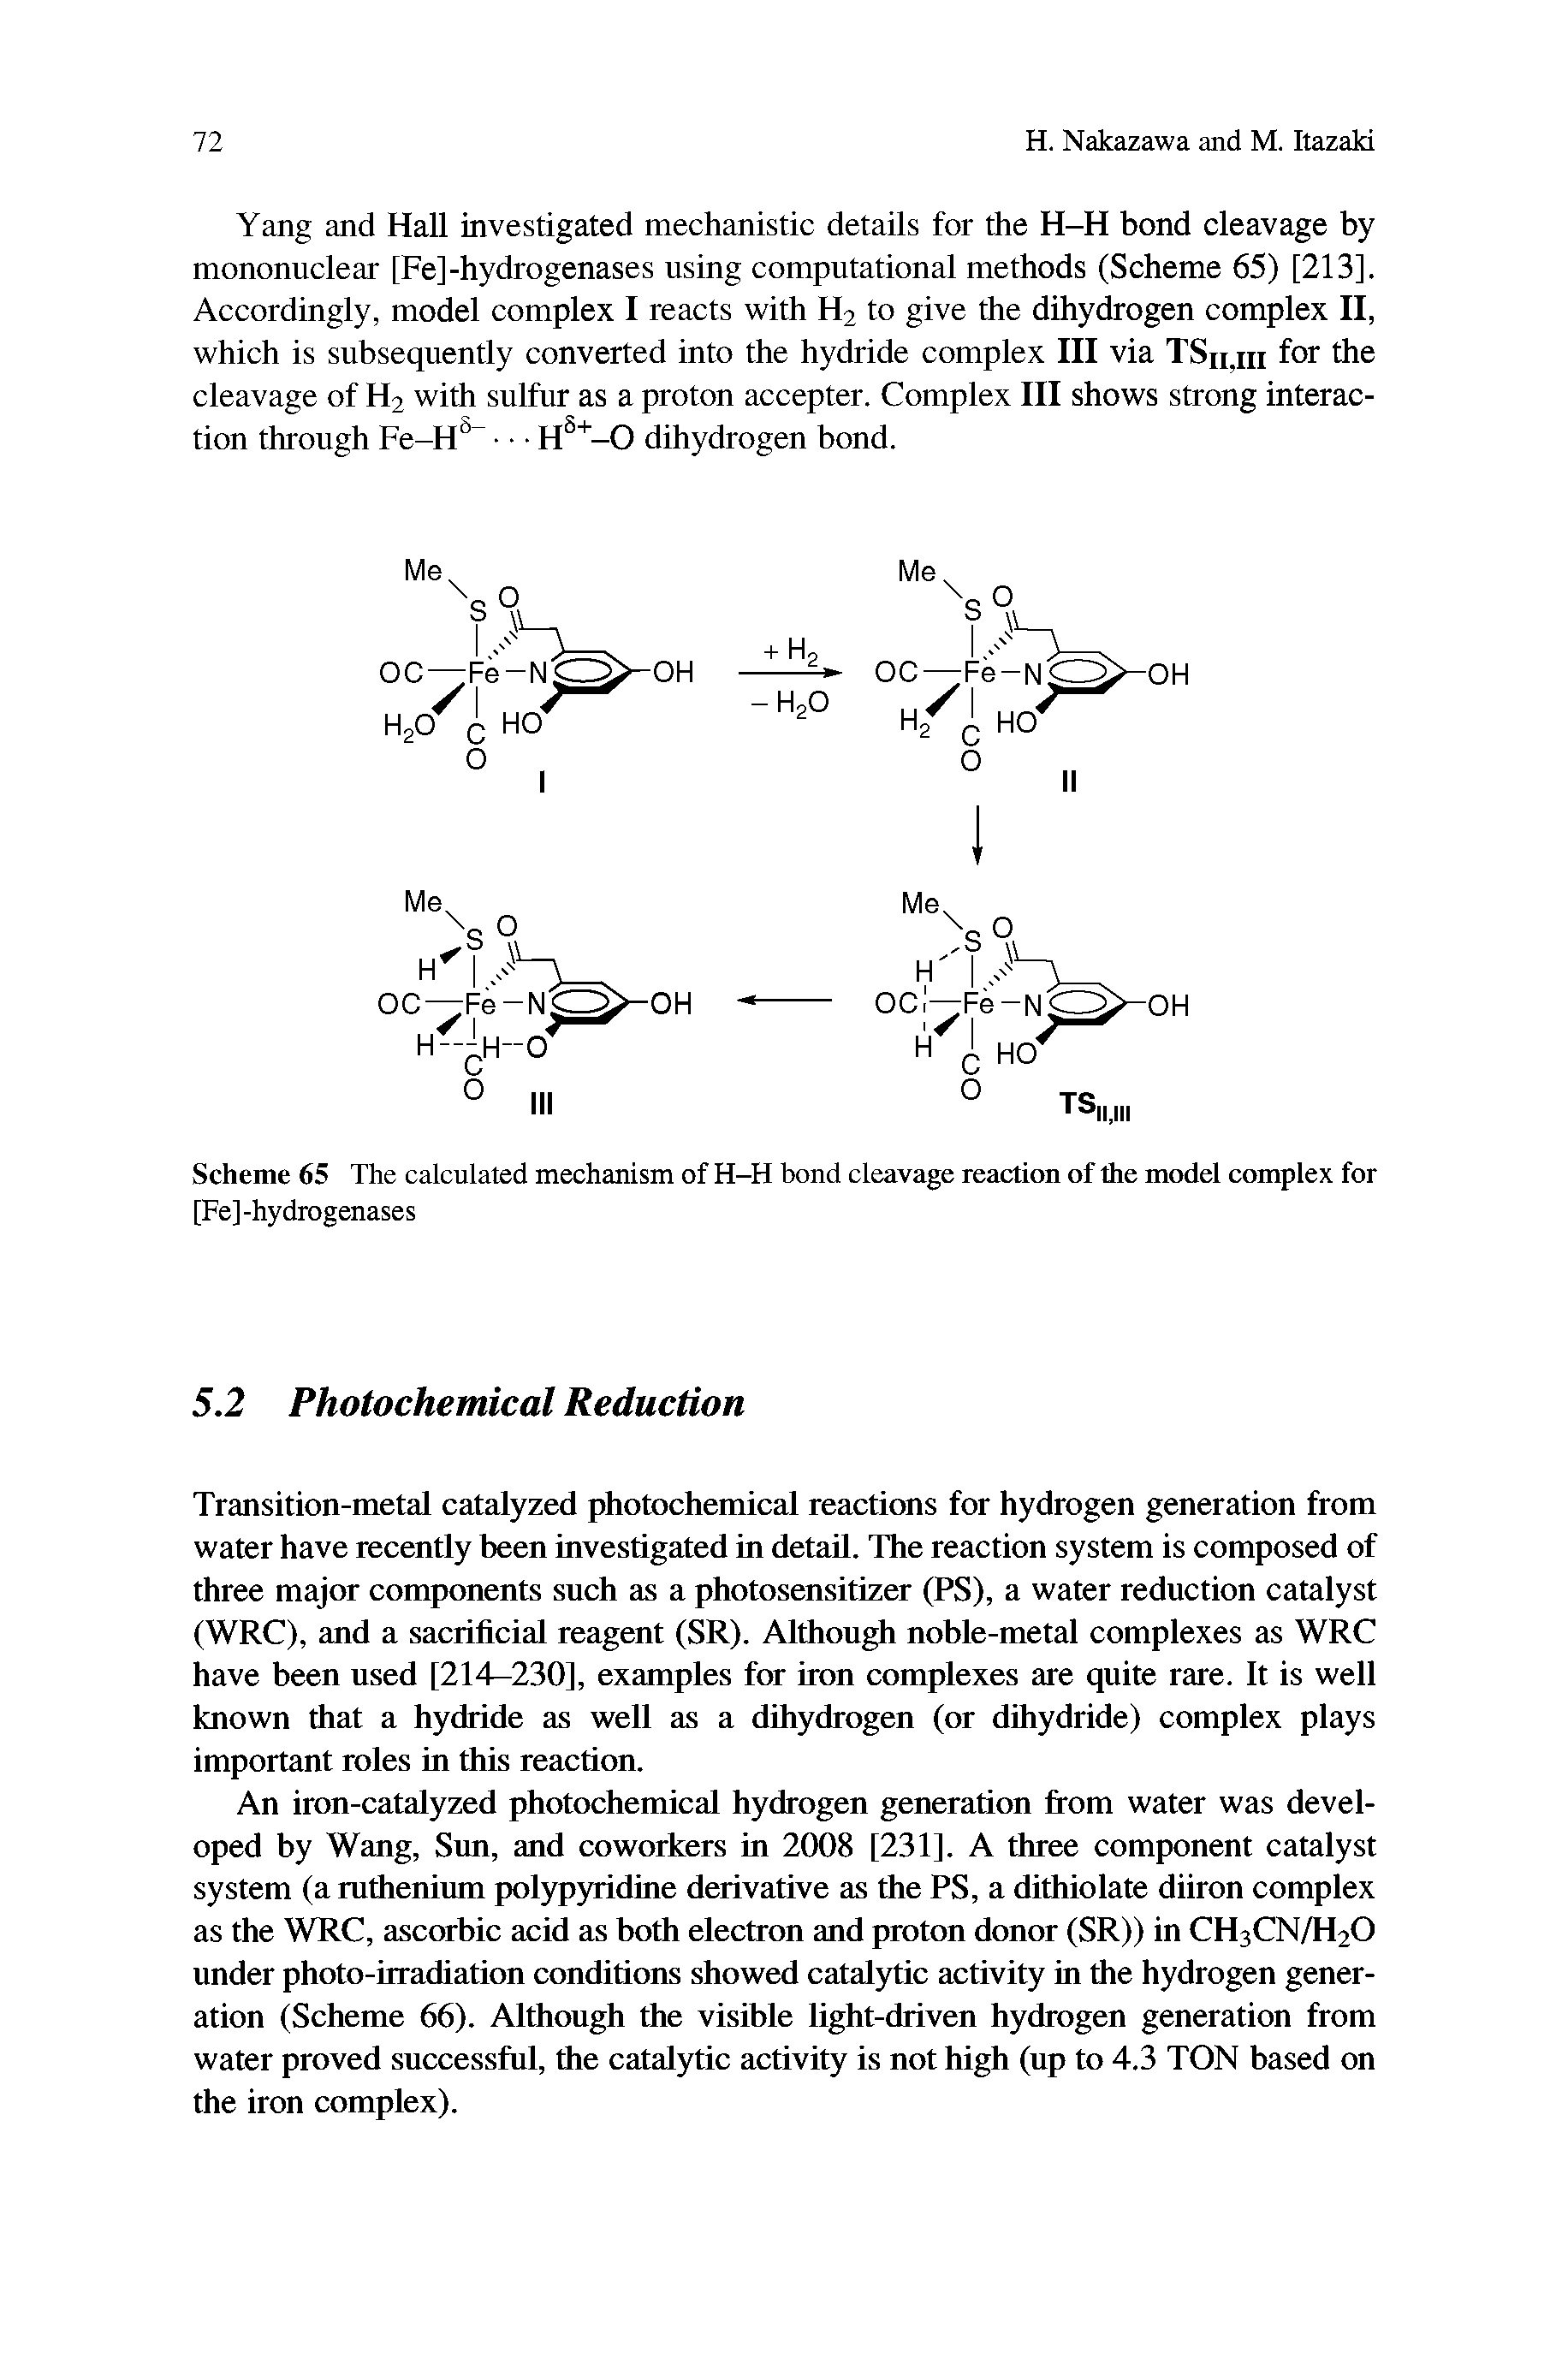 Scheme 65 The calculated mechanism of H-H bond cleavage reaction of the model complex for [Fe] -hydrogenases...